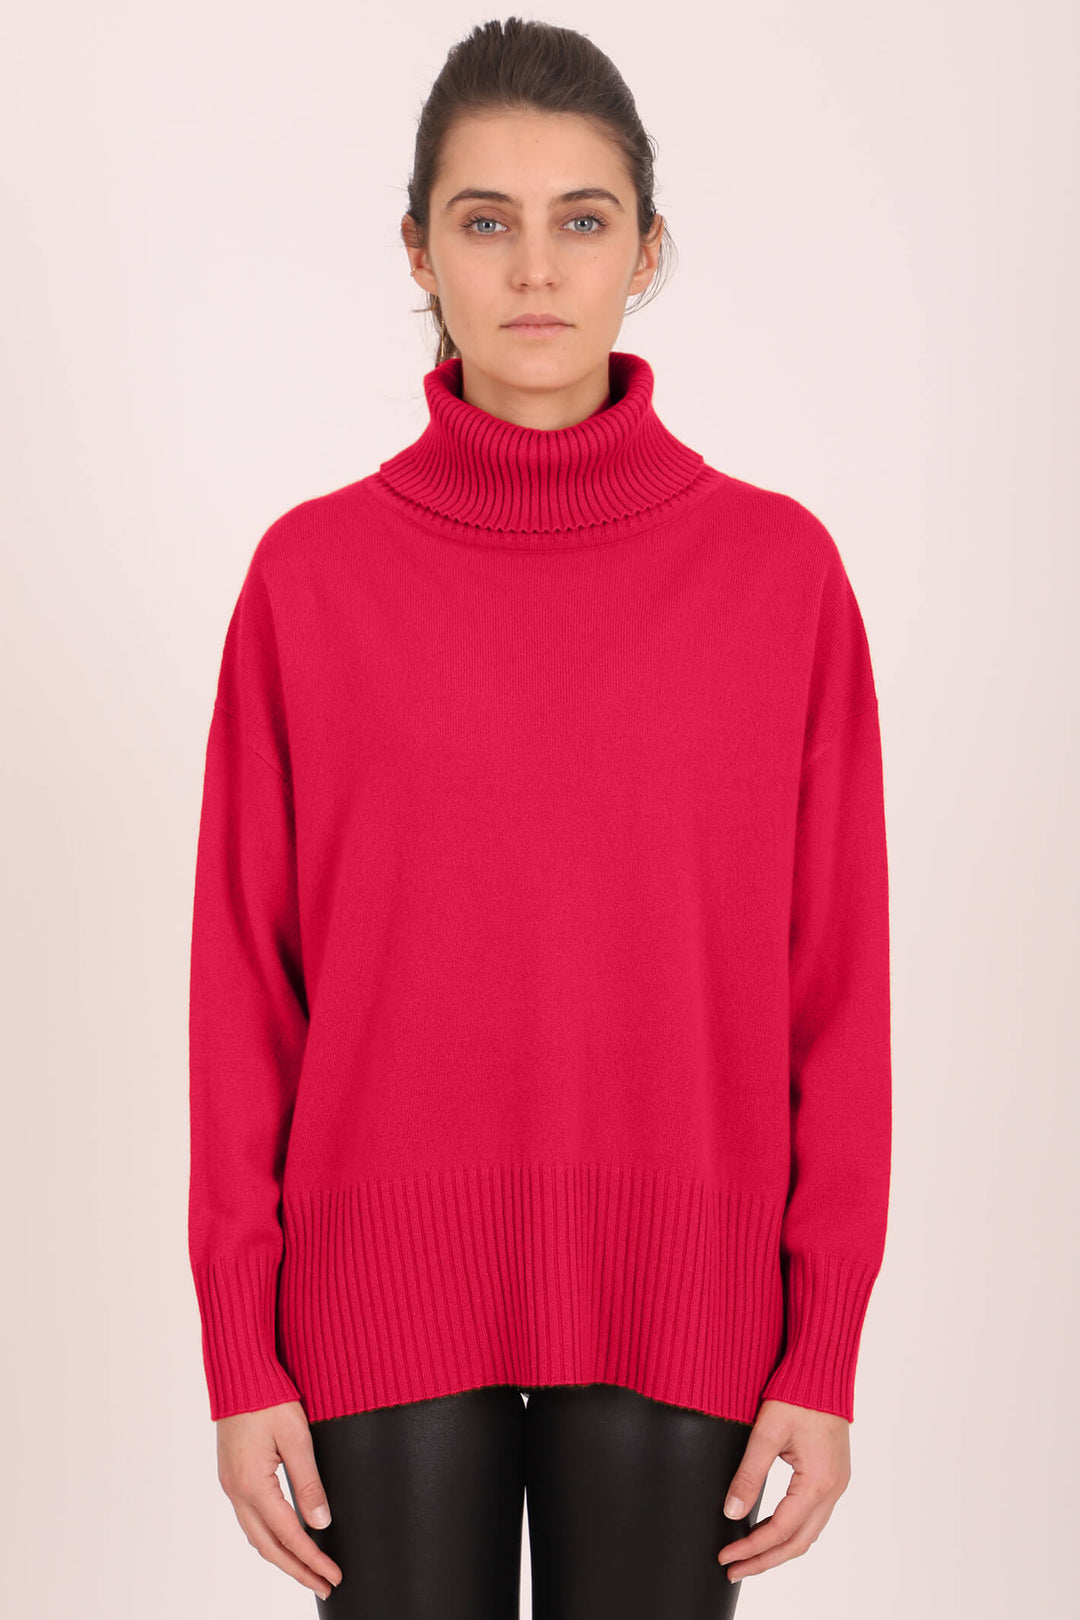 Estheme Hollywood WES2295H Hollywood Pink Roll Neck Relaxed Fit Jumper - Shirley Allum Boutique